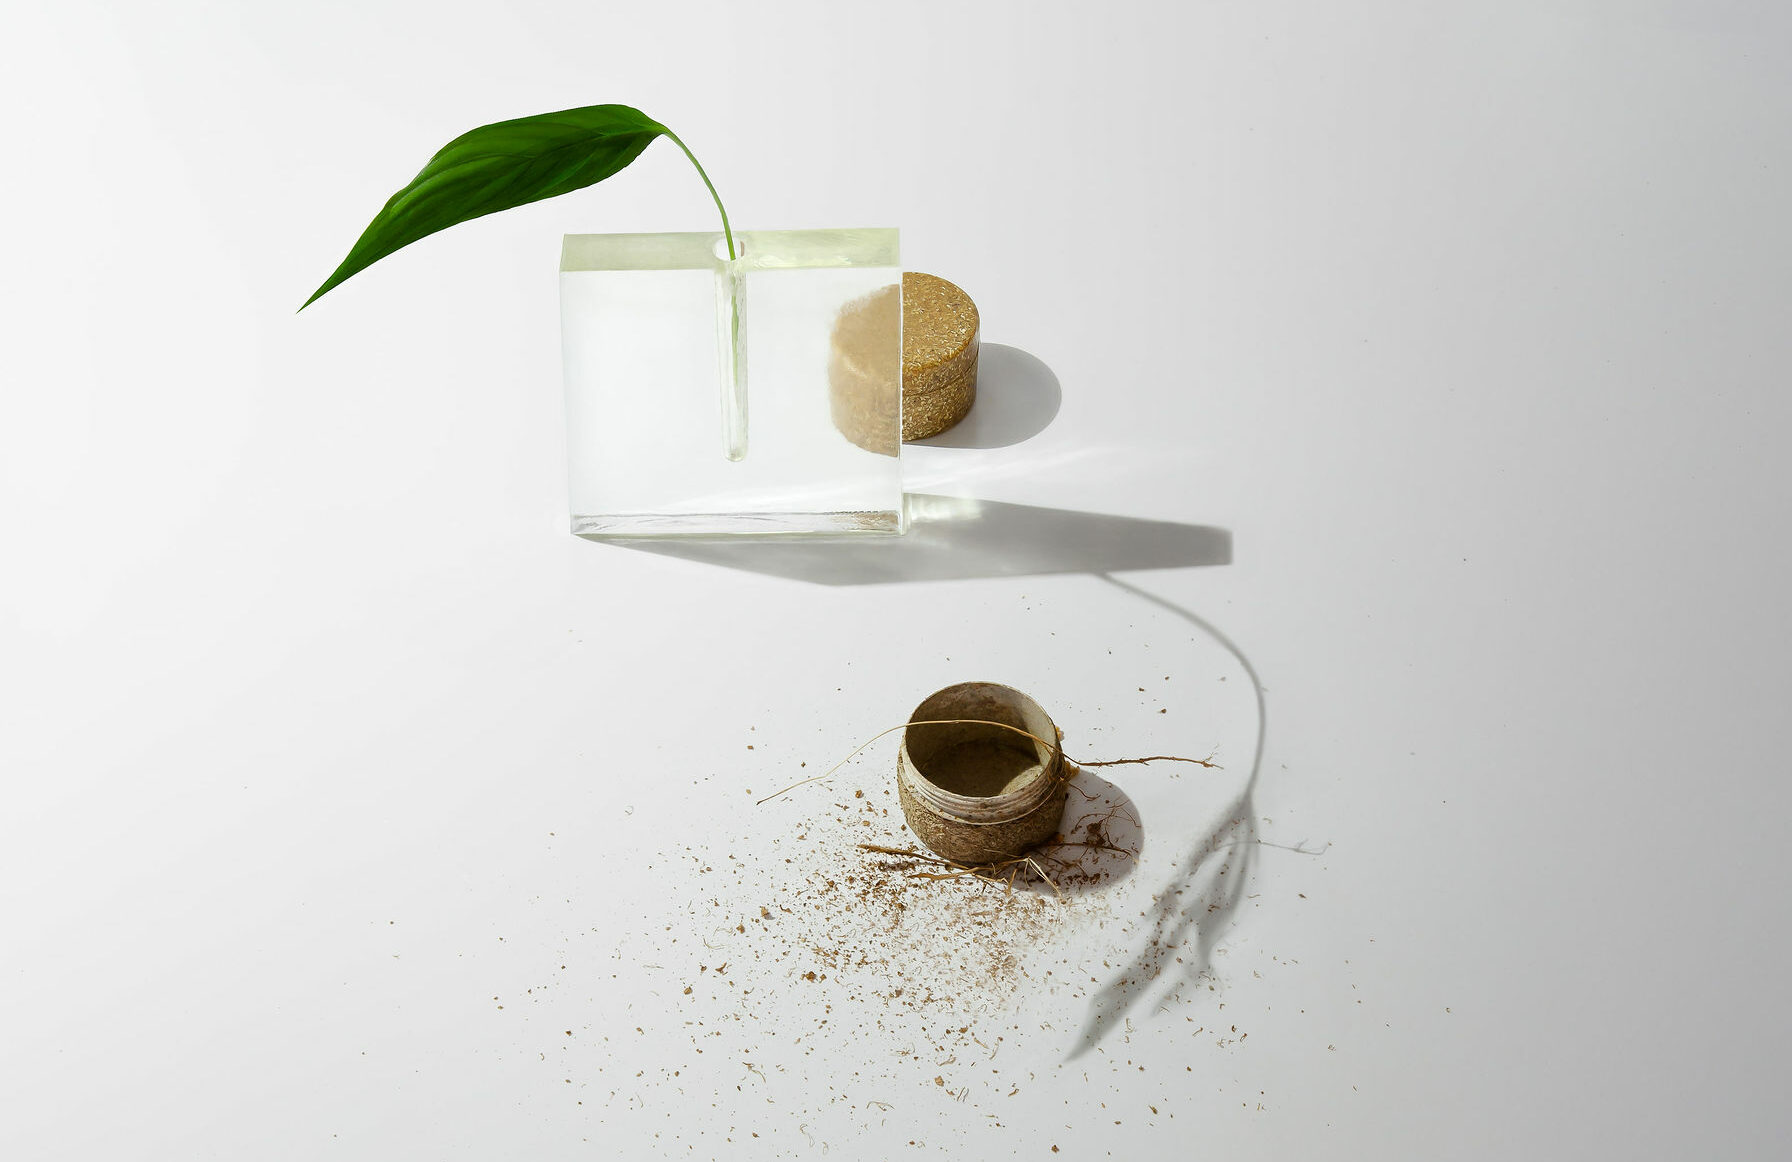 Jars for water-based cosmetics that biodegrade